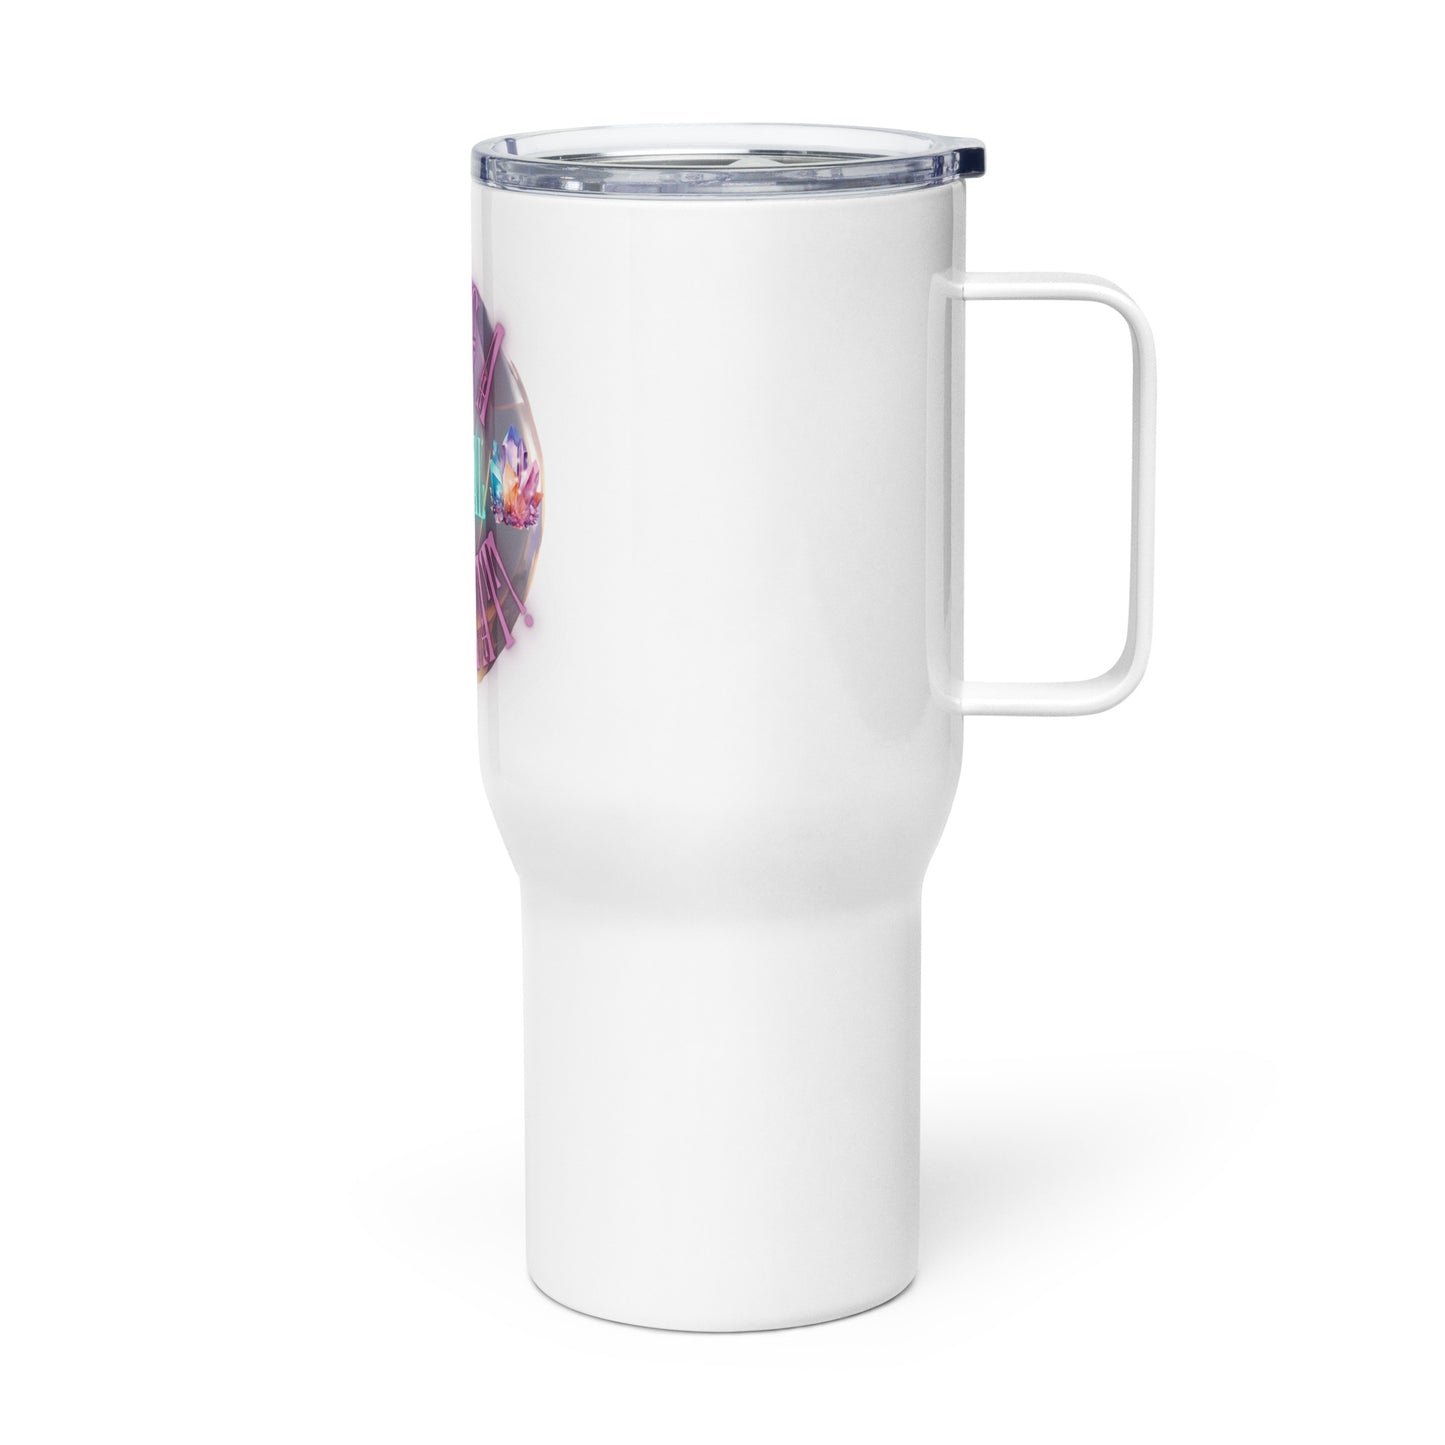 I Have A Crystal For That Travel mug with a handle